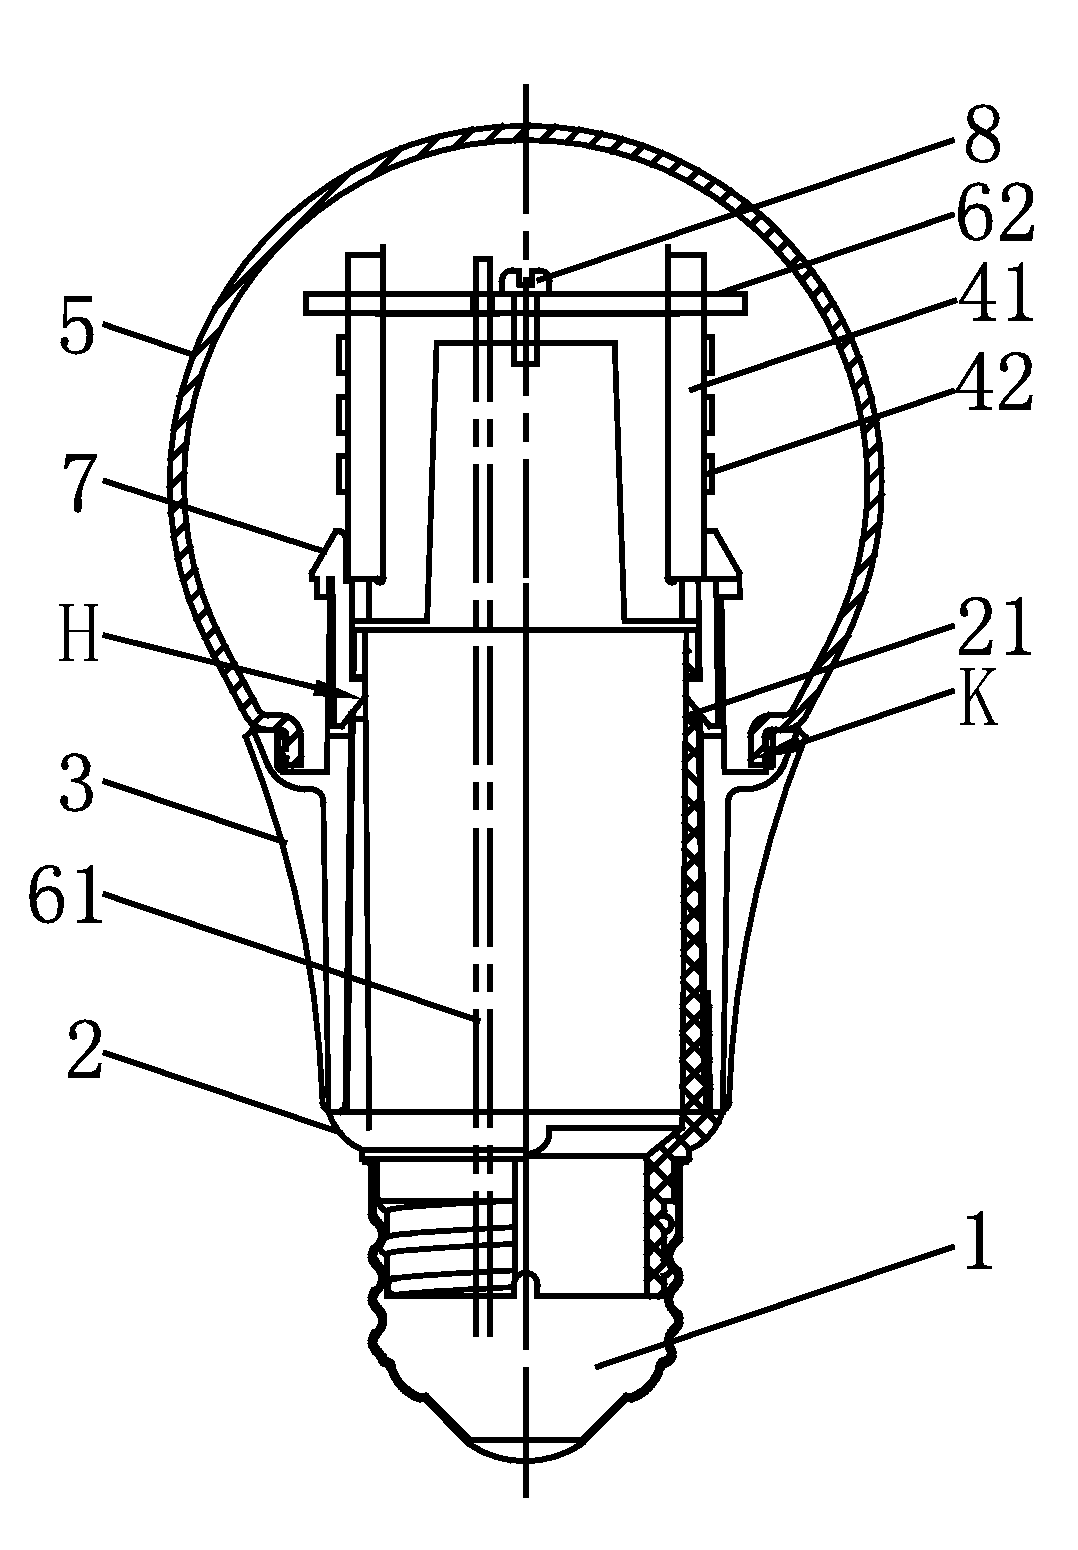 LED bulb emitting light ray in a downward direction and manufacturing method thereof